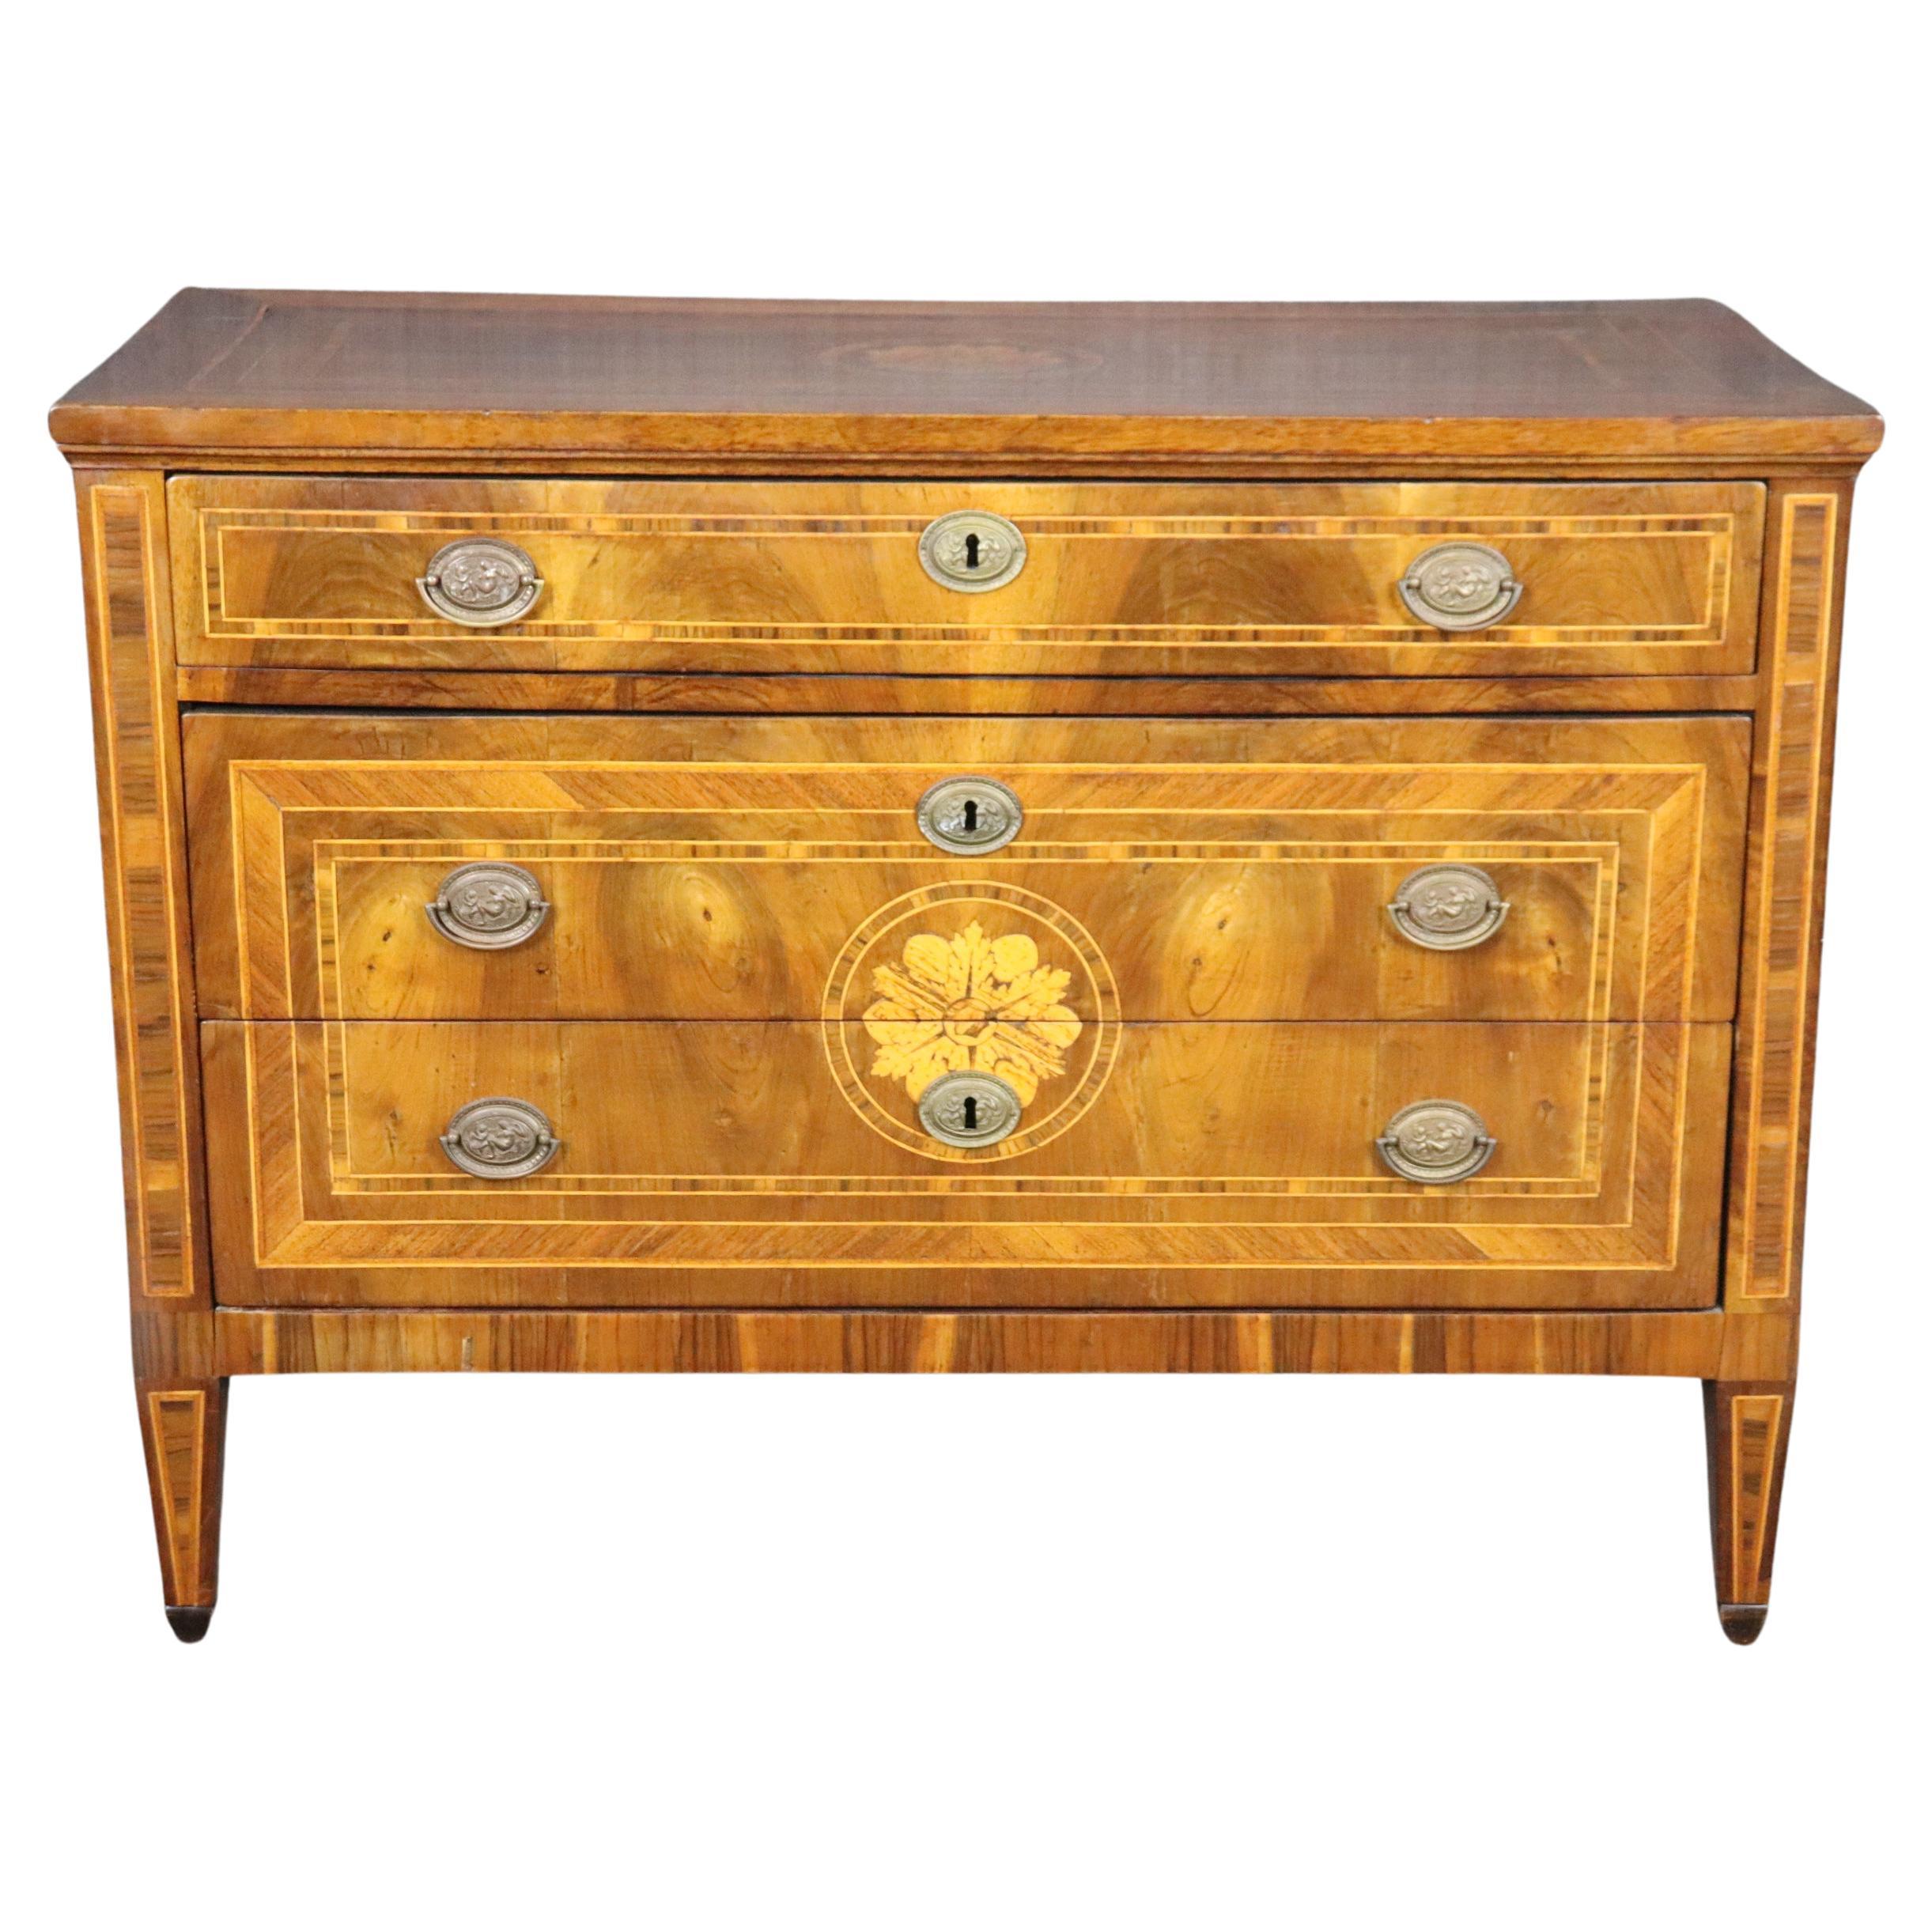 Fantastic 1850s era Italian Made Formal Walnut Directoire Style Commode  For Sale